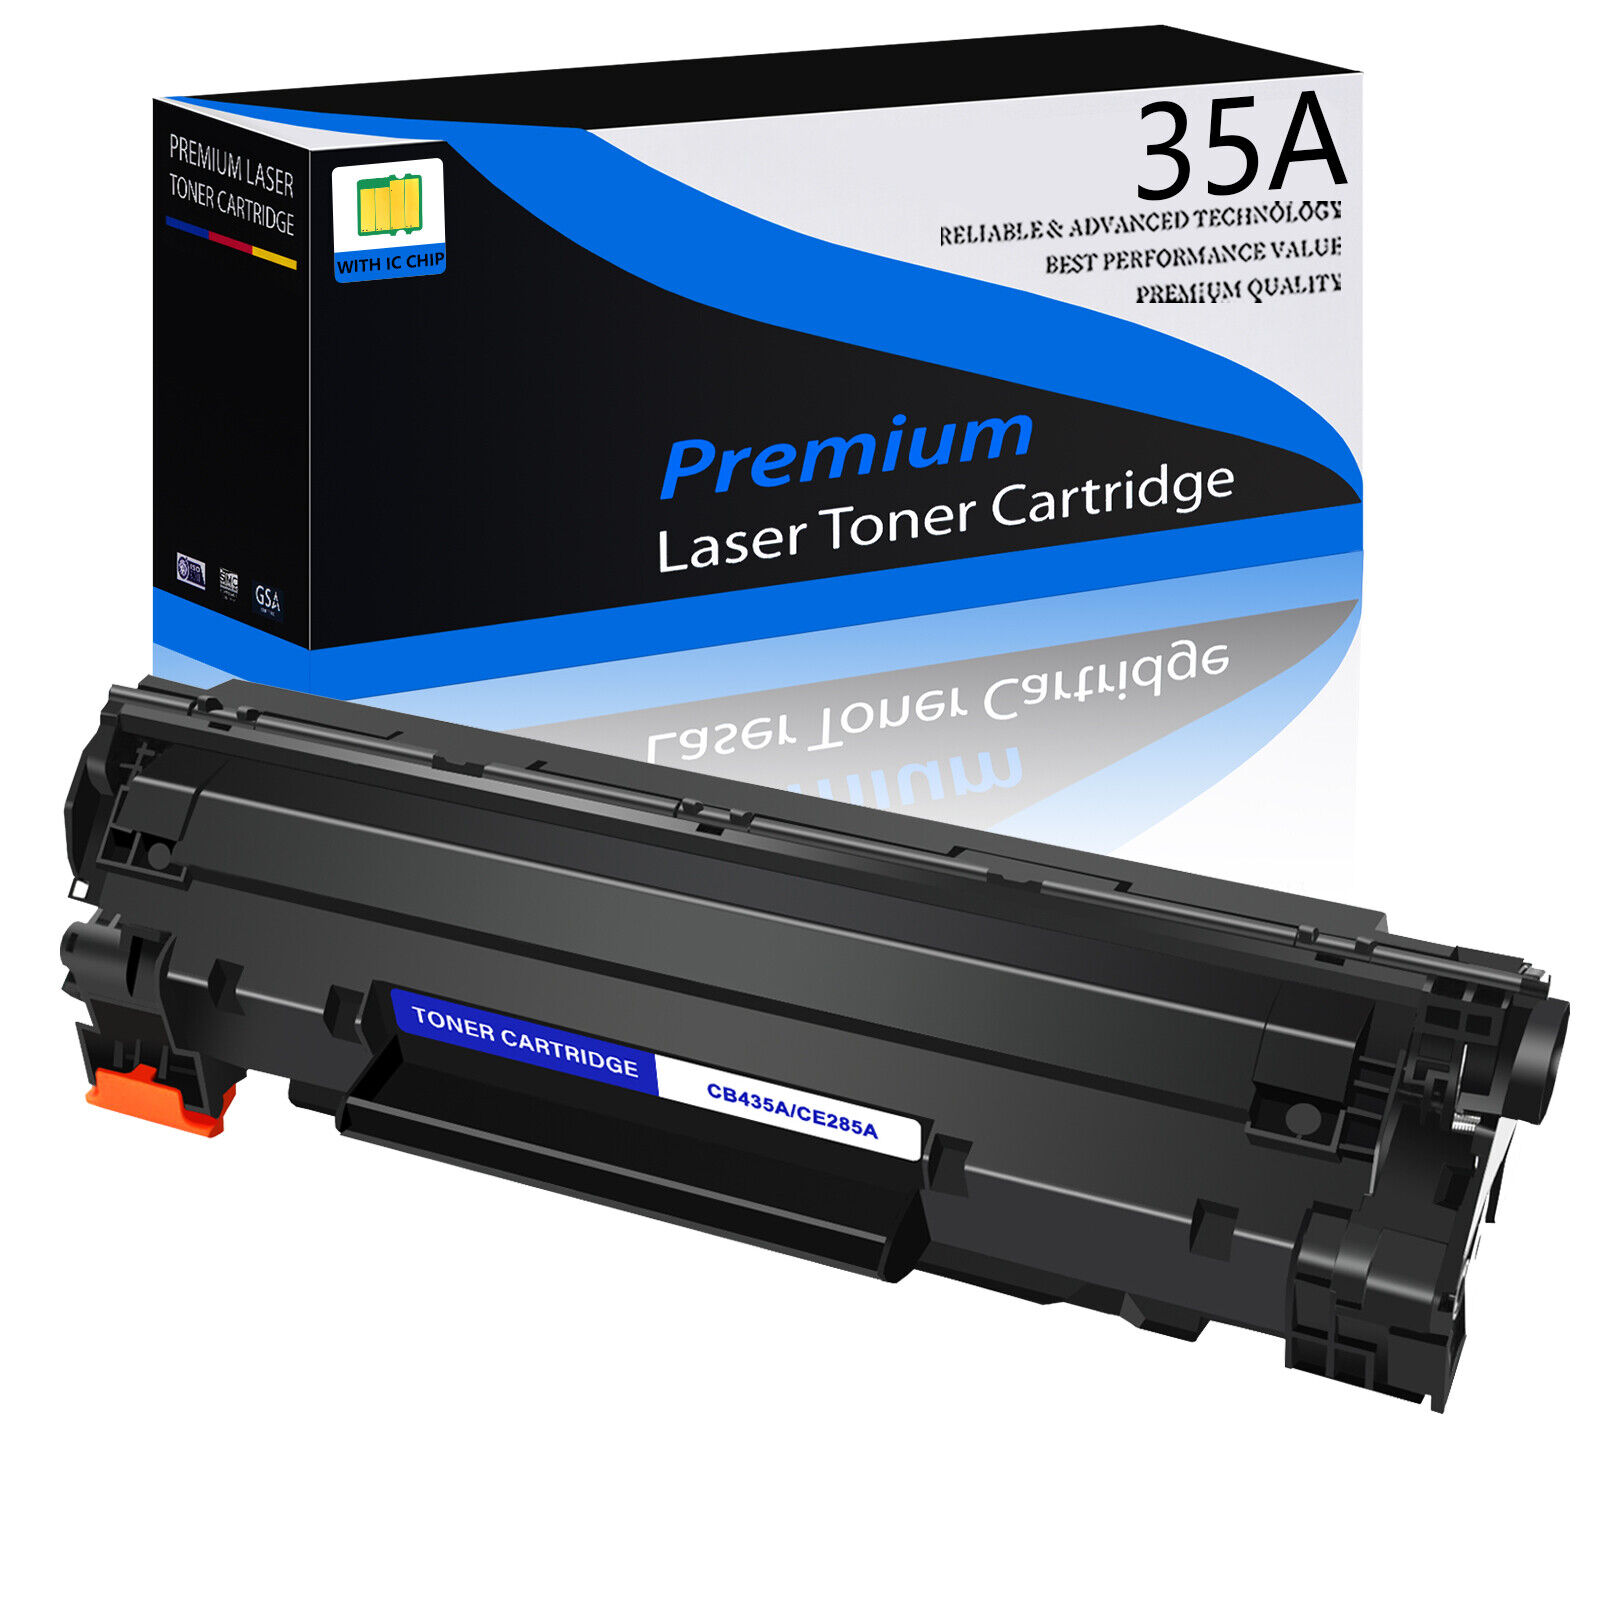 1-4PK CB435A 35A High Yield Toner Compatible For HP LaserJet P1005 P1006 P1003